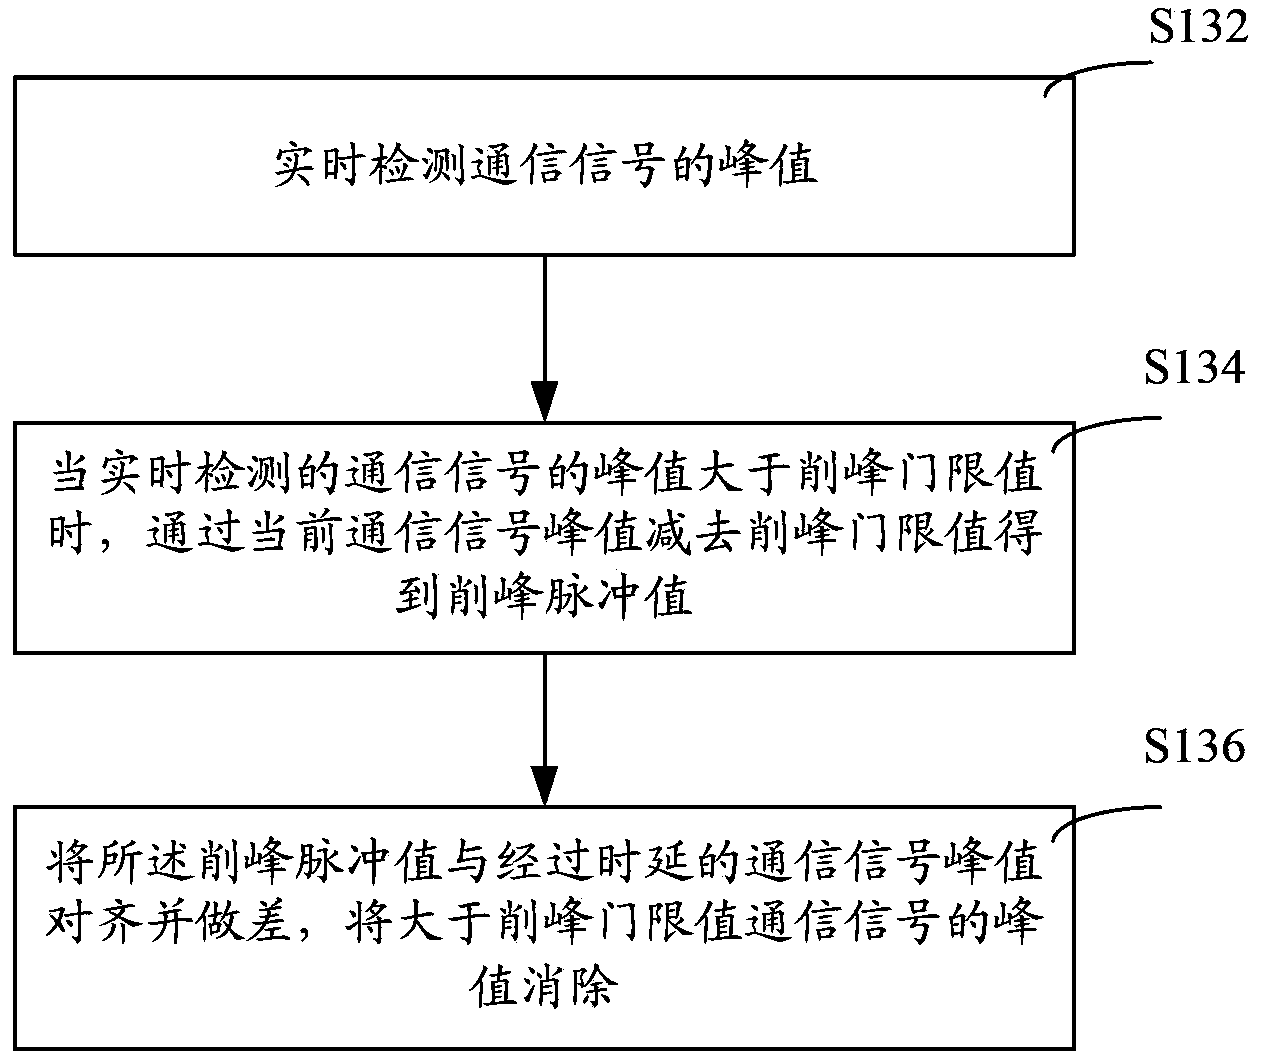 Method and device for dynamic peak clipping and DPD (Digital Pre-Distortion) processing system